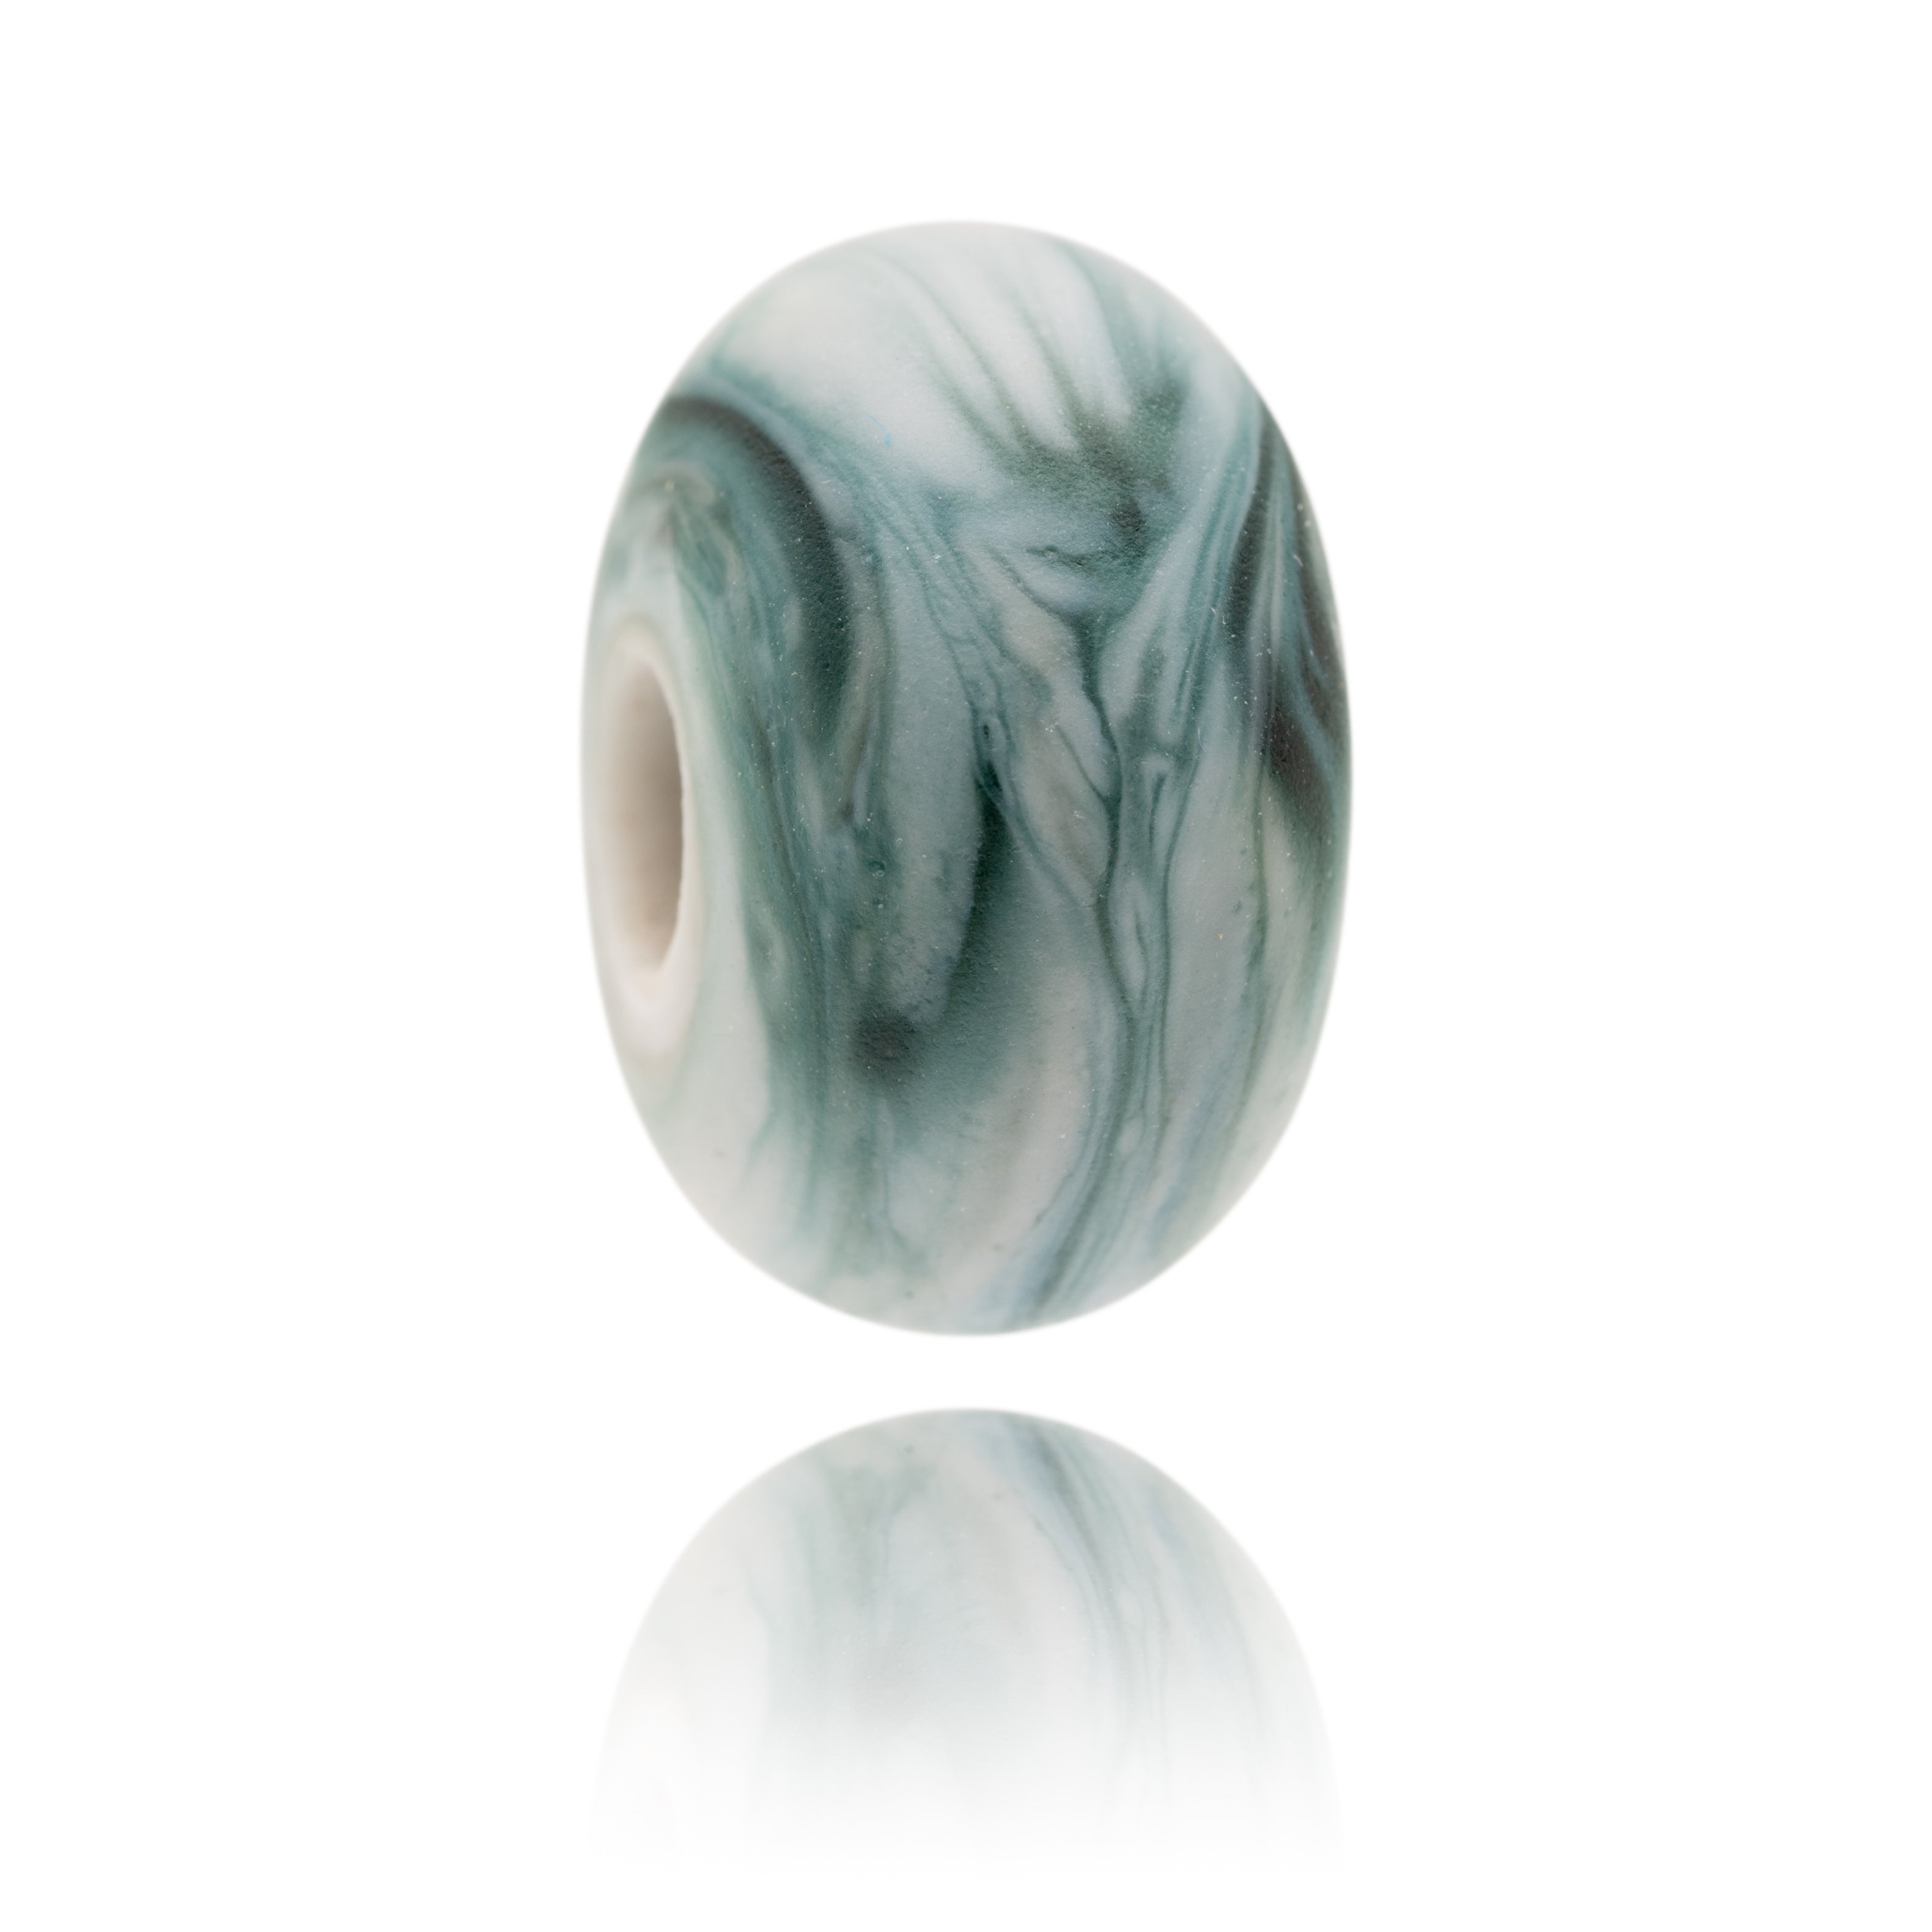 Swirling grey Murano glass bead with frosted surface for Gara Rock in. South Devon.